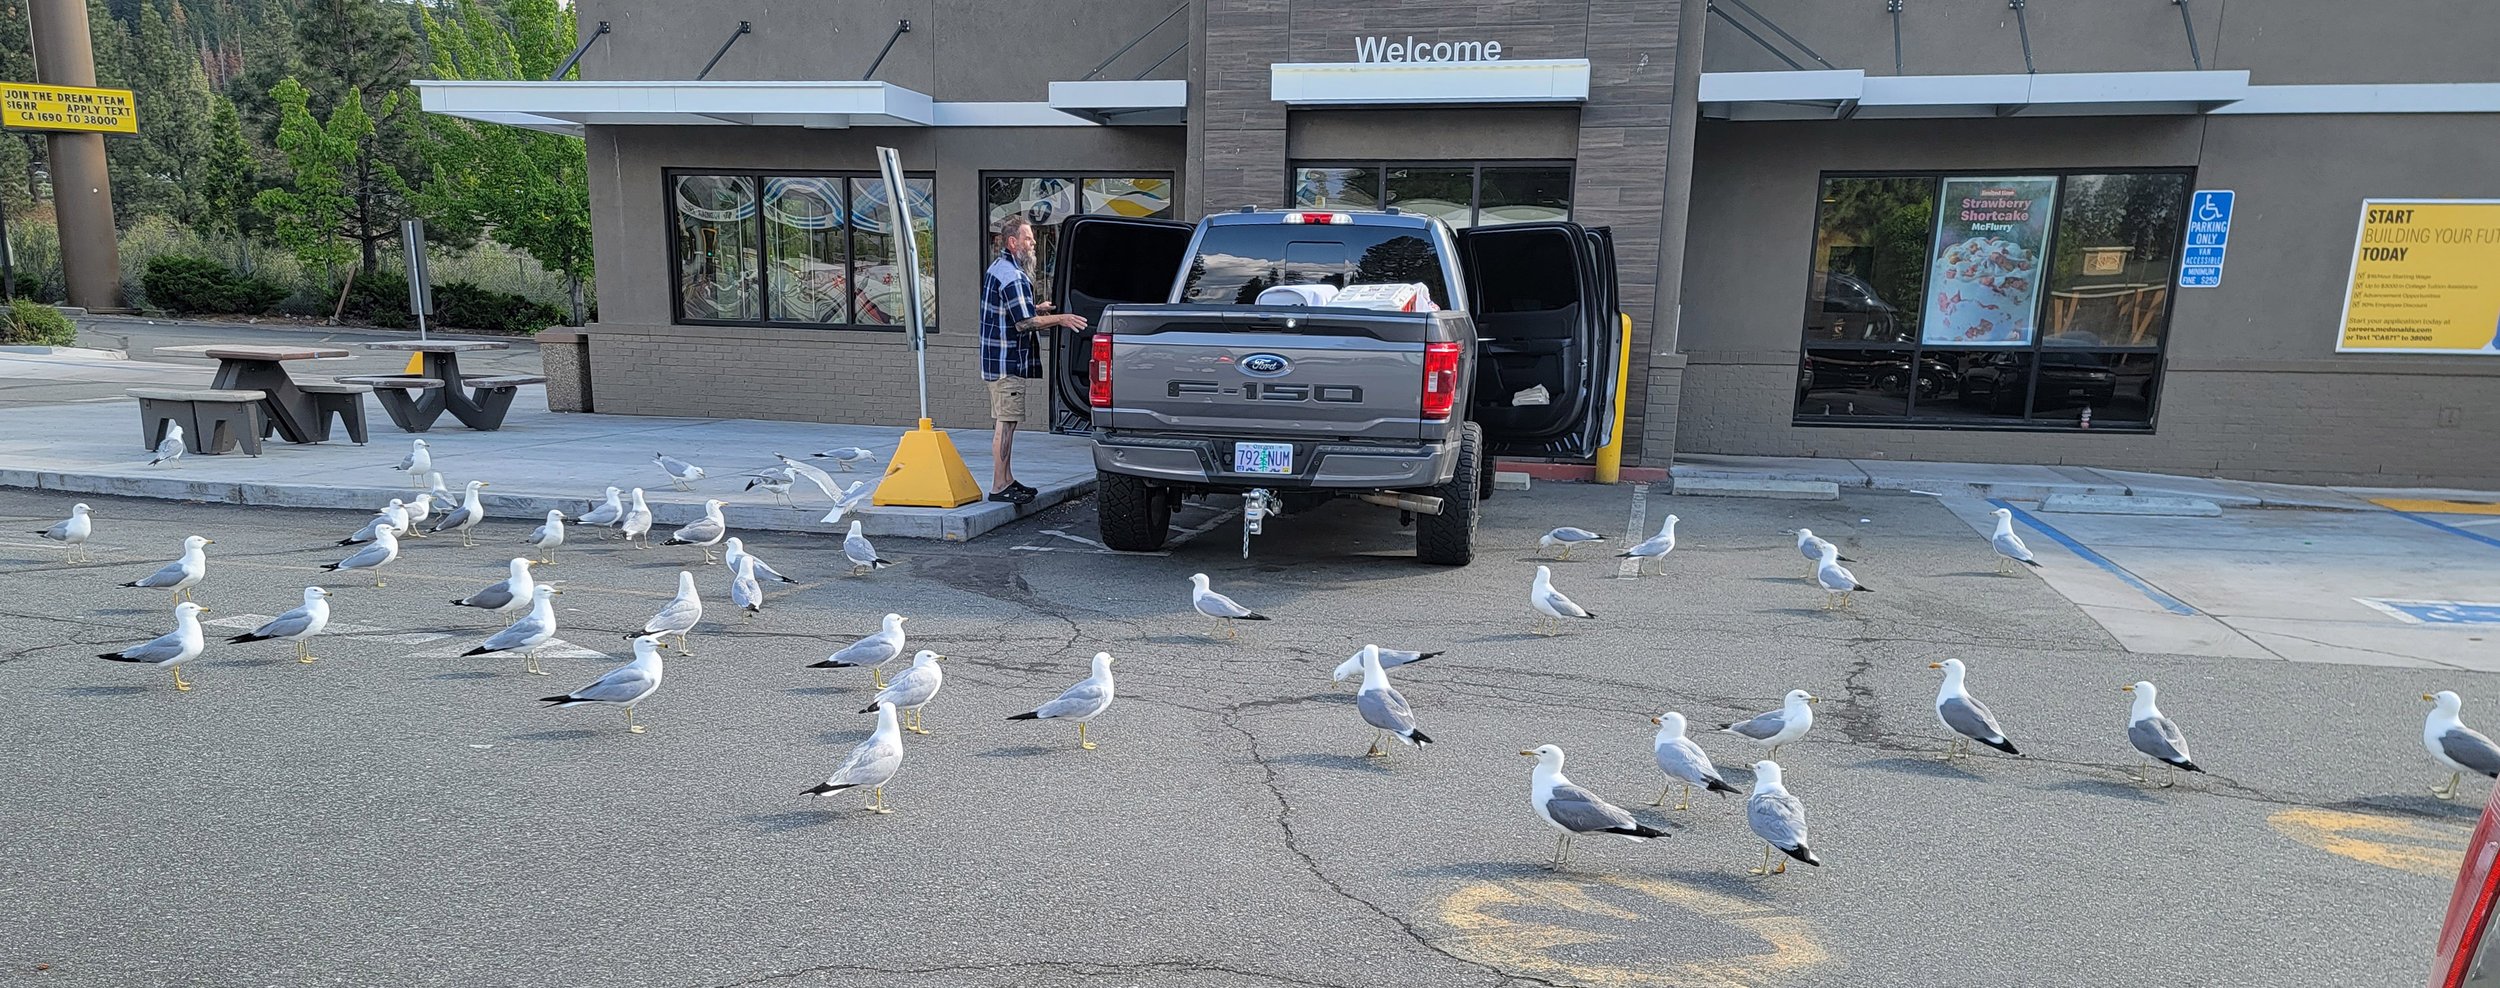 Some loud redneck and his brood were happily feeding the gull swarm. Hope they find your truck and cover it with turds.